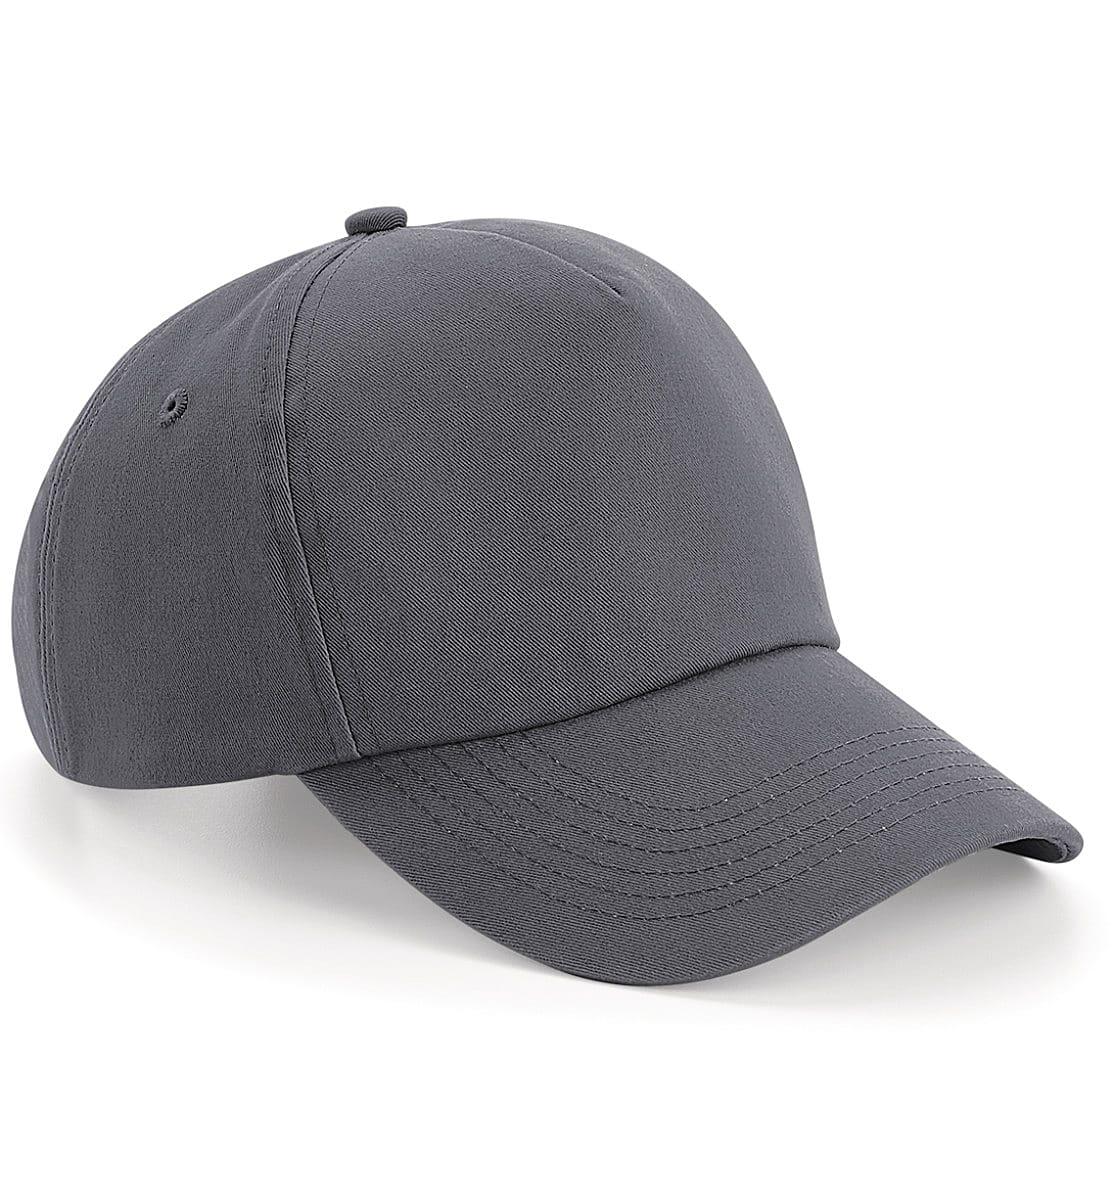 Beechfield Authentic 5 Panel Cap in Graphite (Product Code: B25)